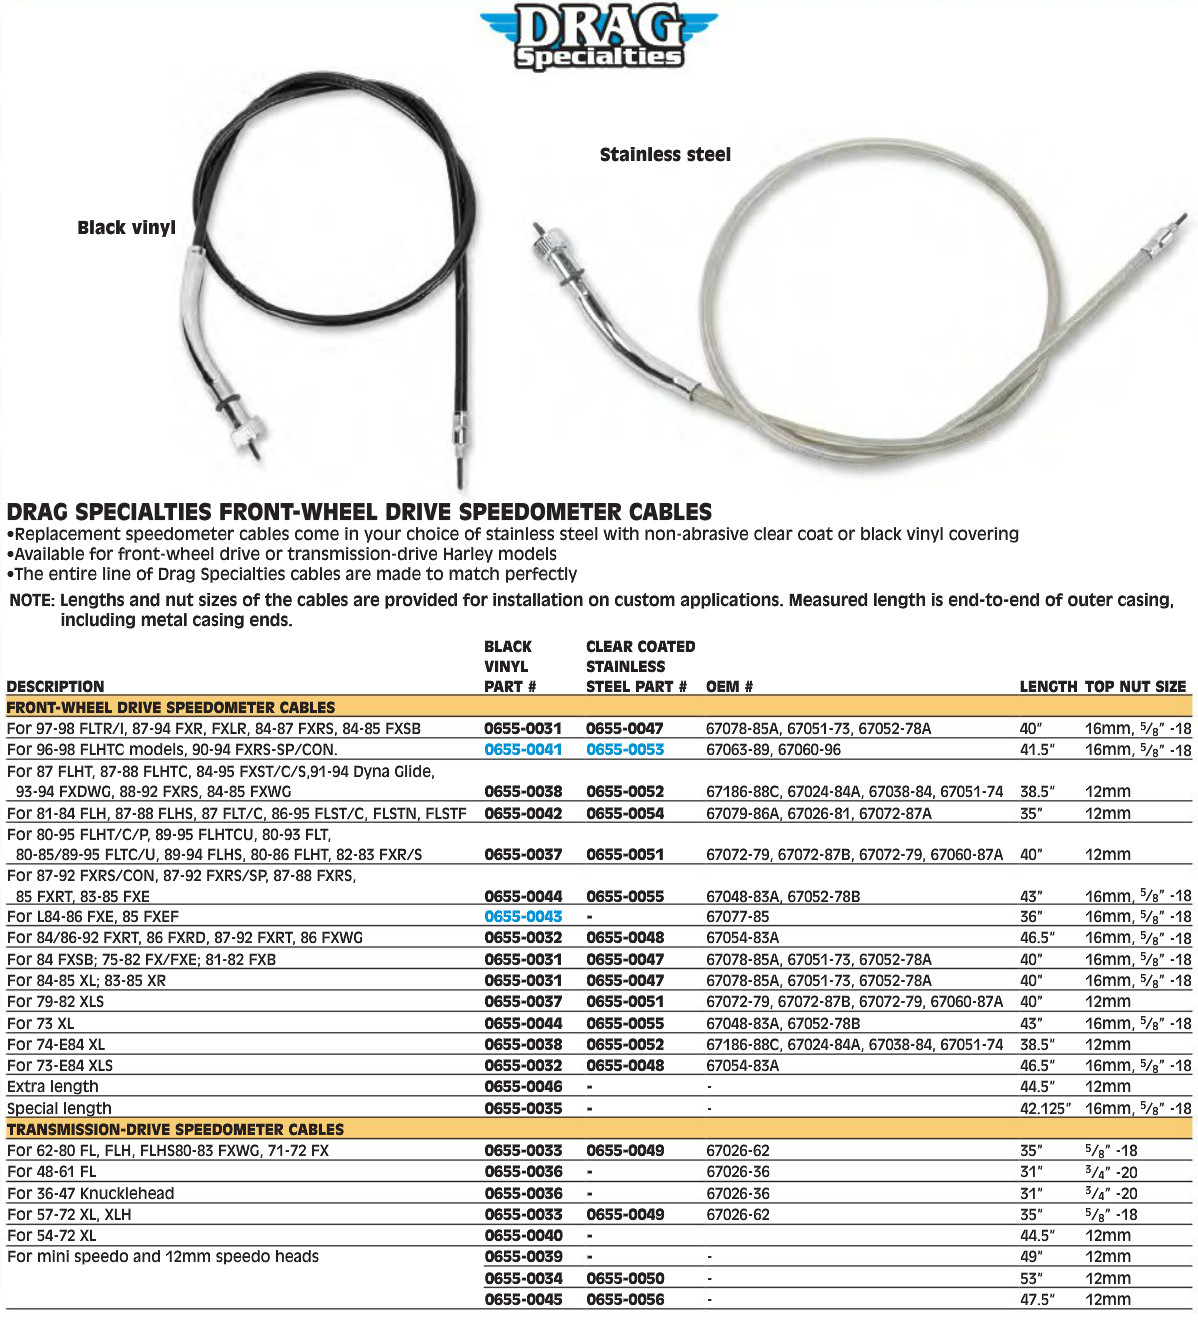 40" Stainless Steel Speedometer Cable - Wheel Drive - Replaces 67072-79 67072-87B 67060-87A - Click Image to Close